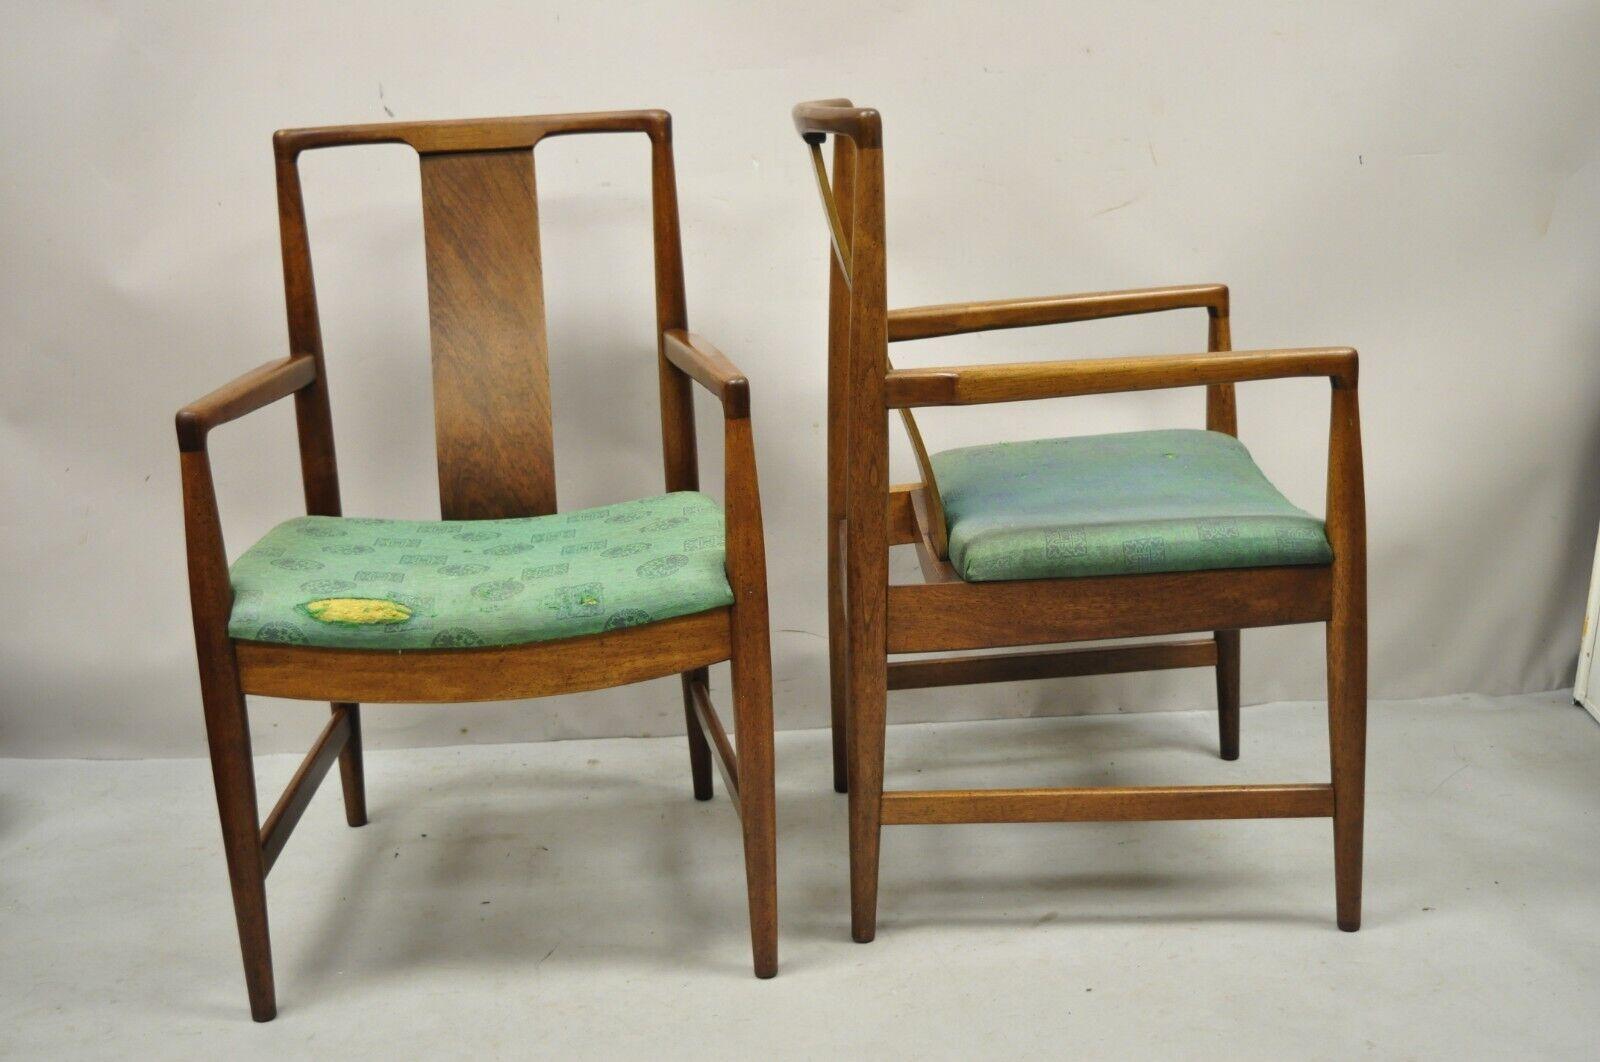 20th Century Mid-Century Modern Walnut Curved Angled Back Dining Arm Chairs - a Pair For Sale